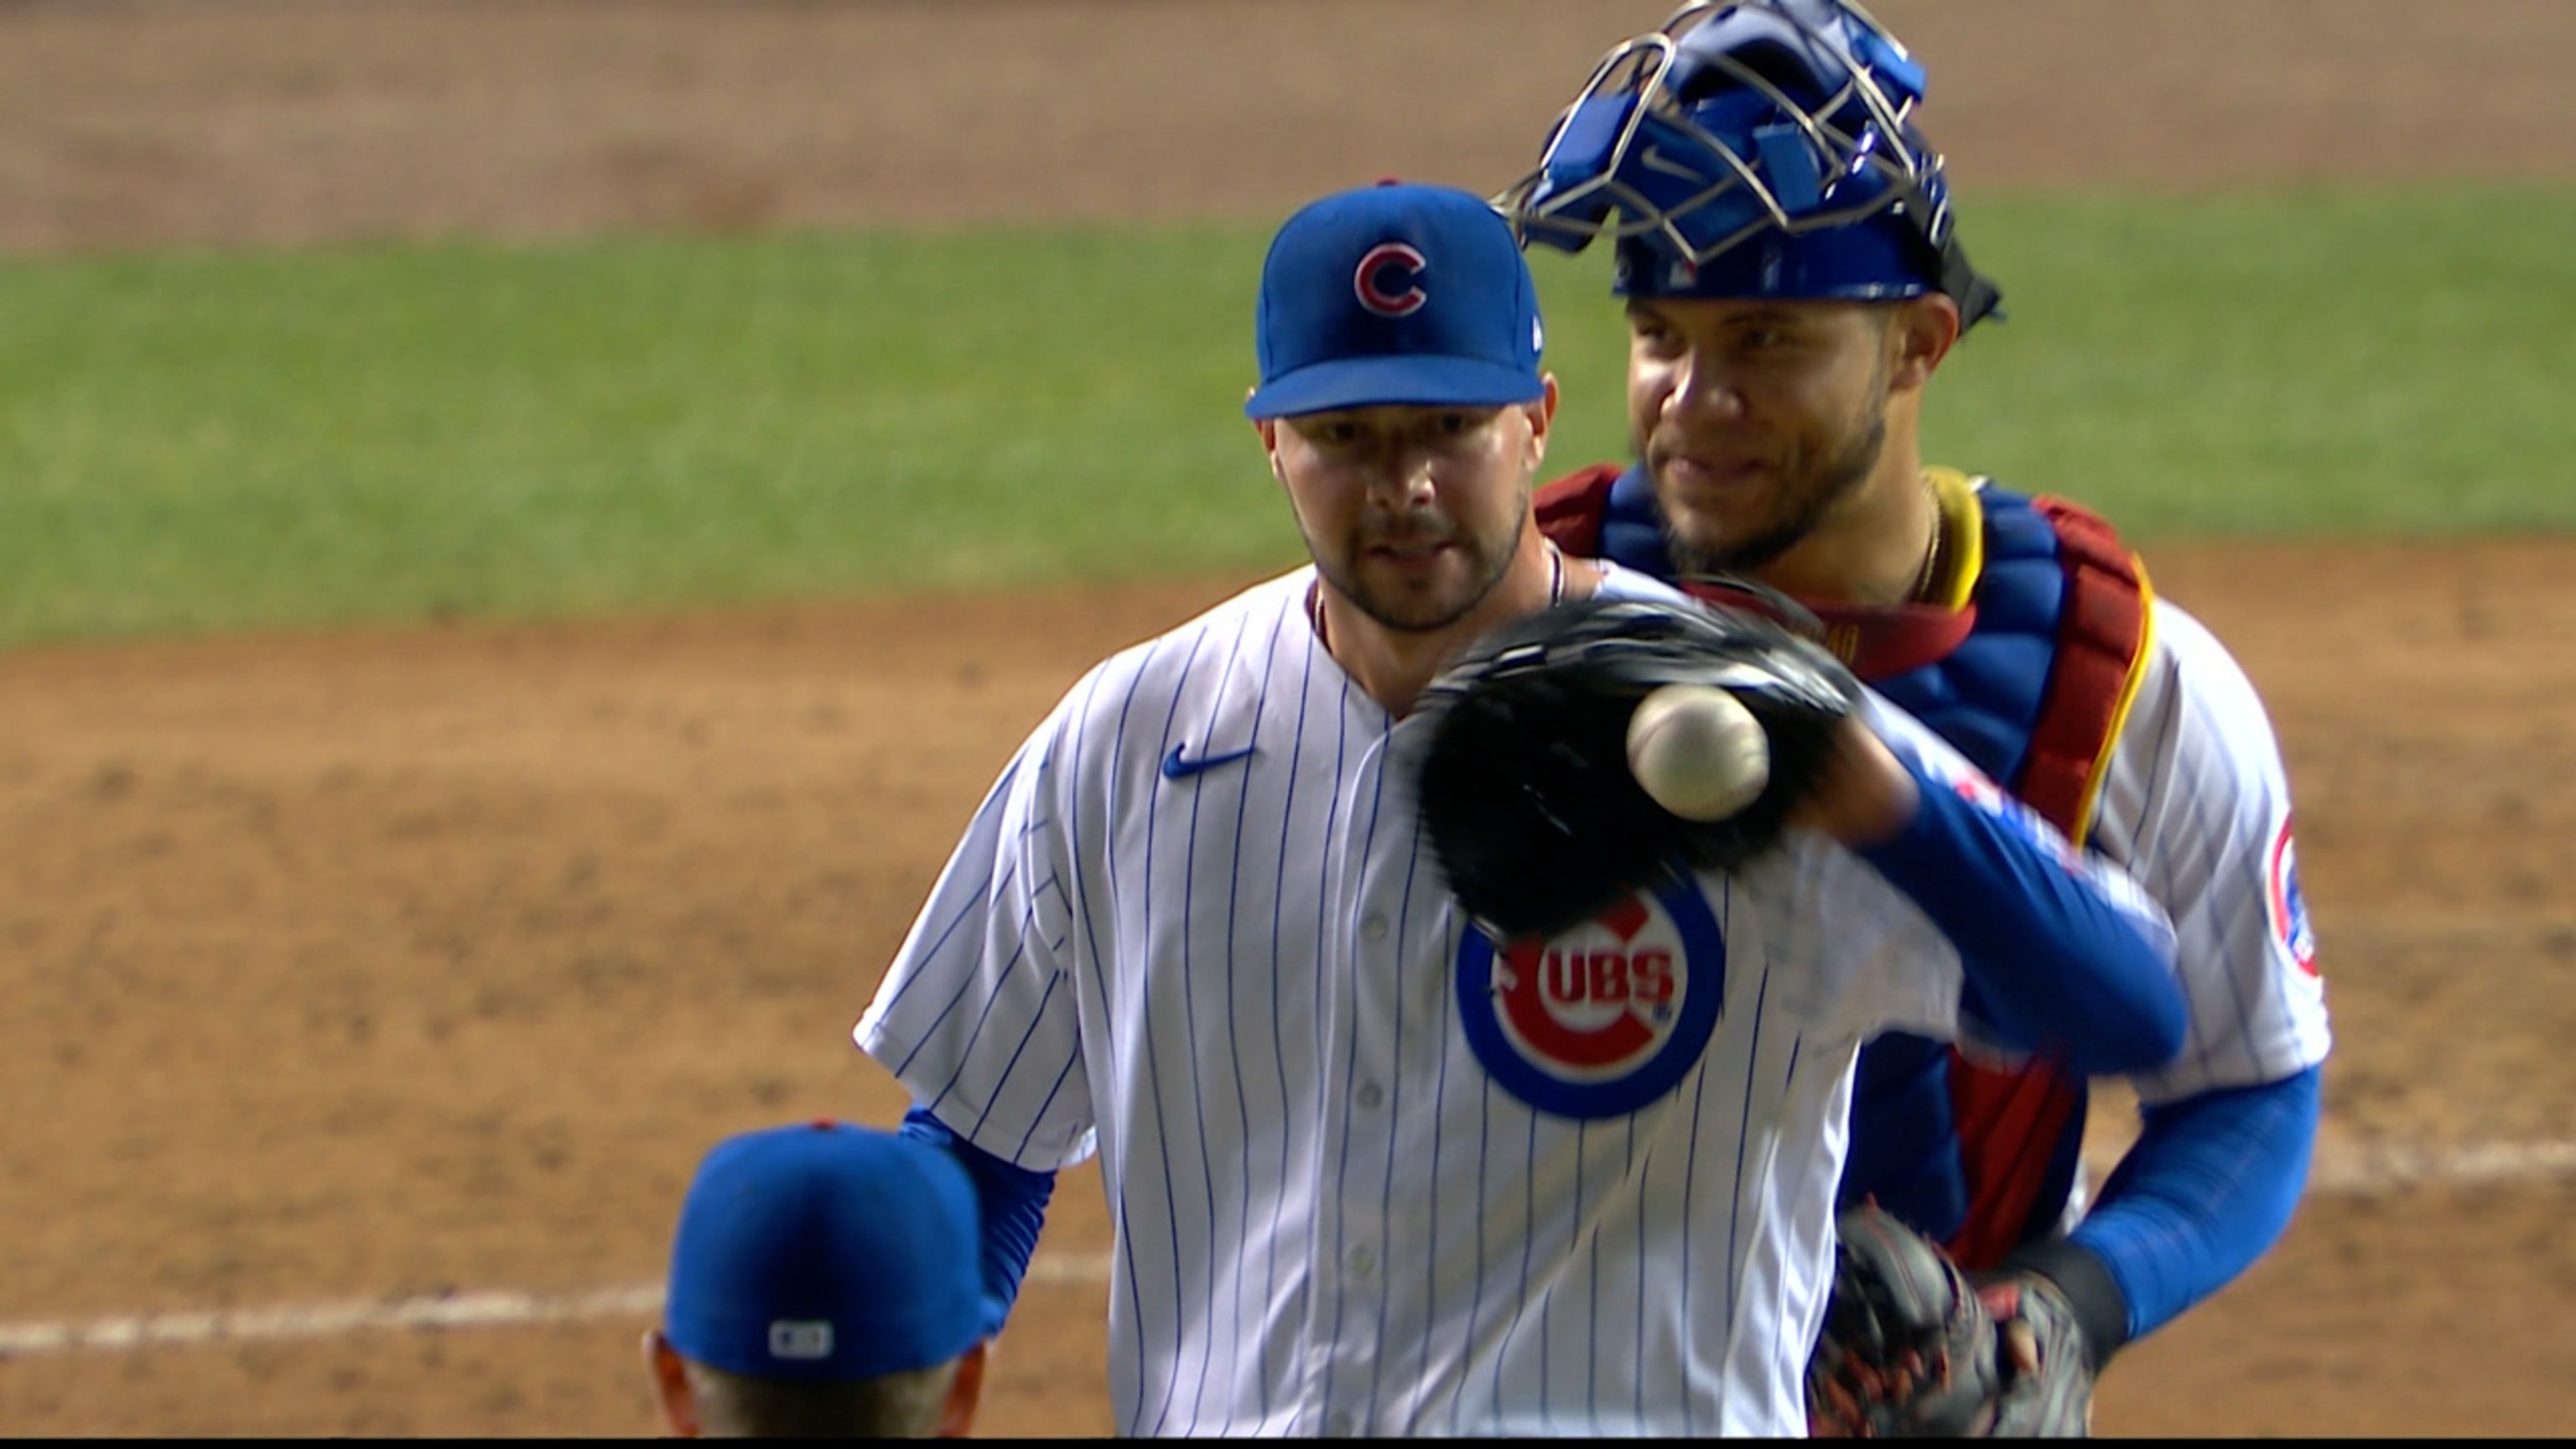 Cubs' Ian Happ says fans at Target Field hit him with Skittles